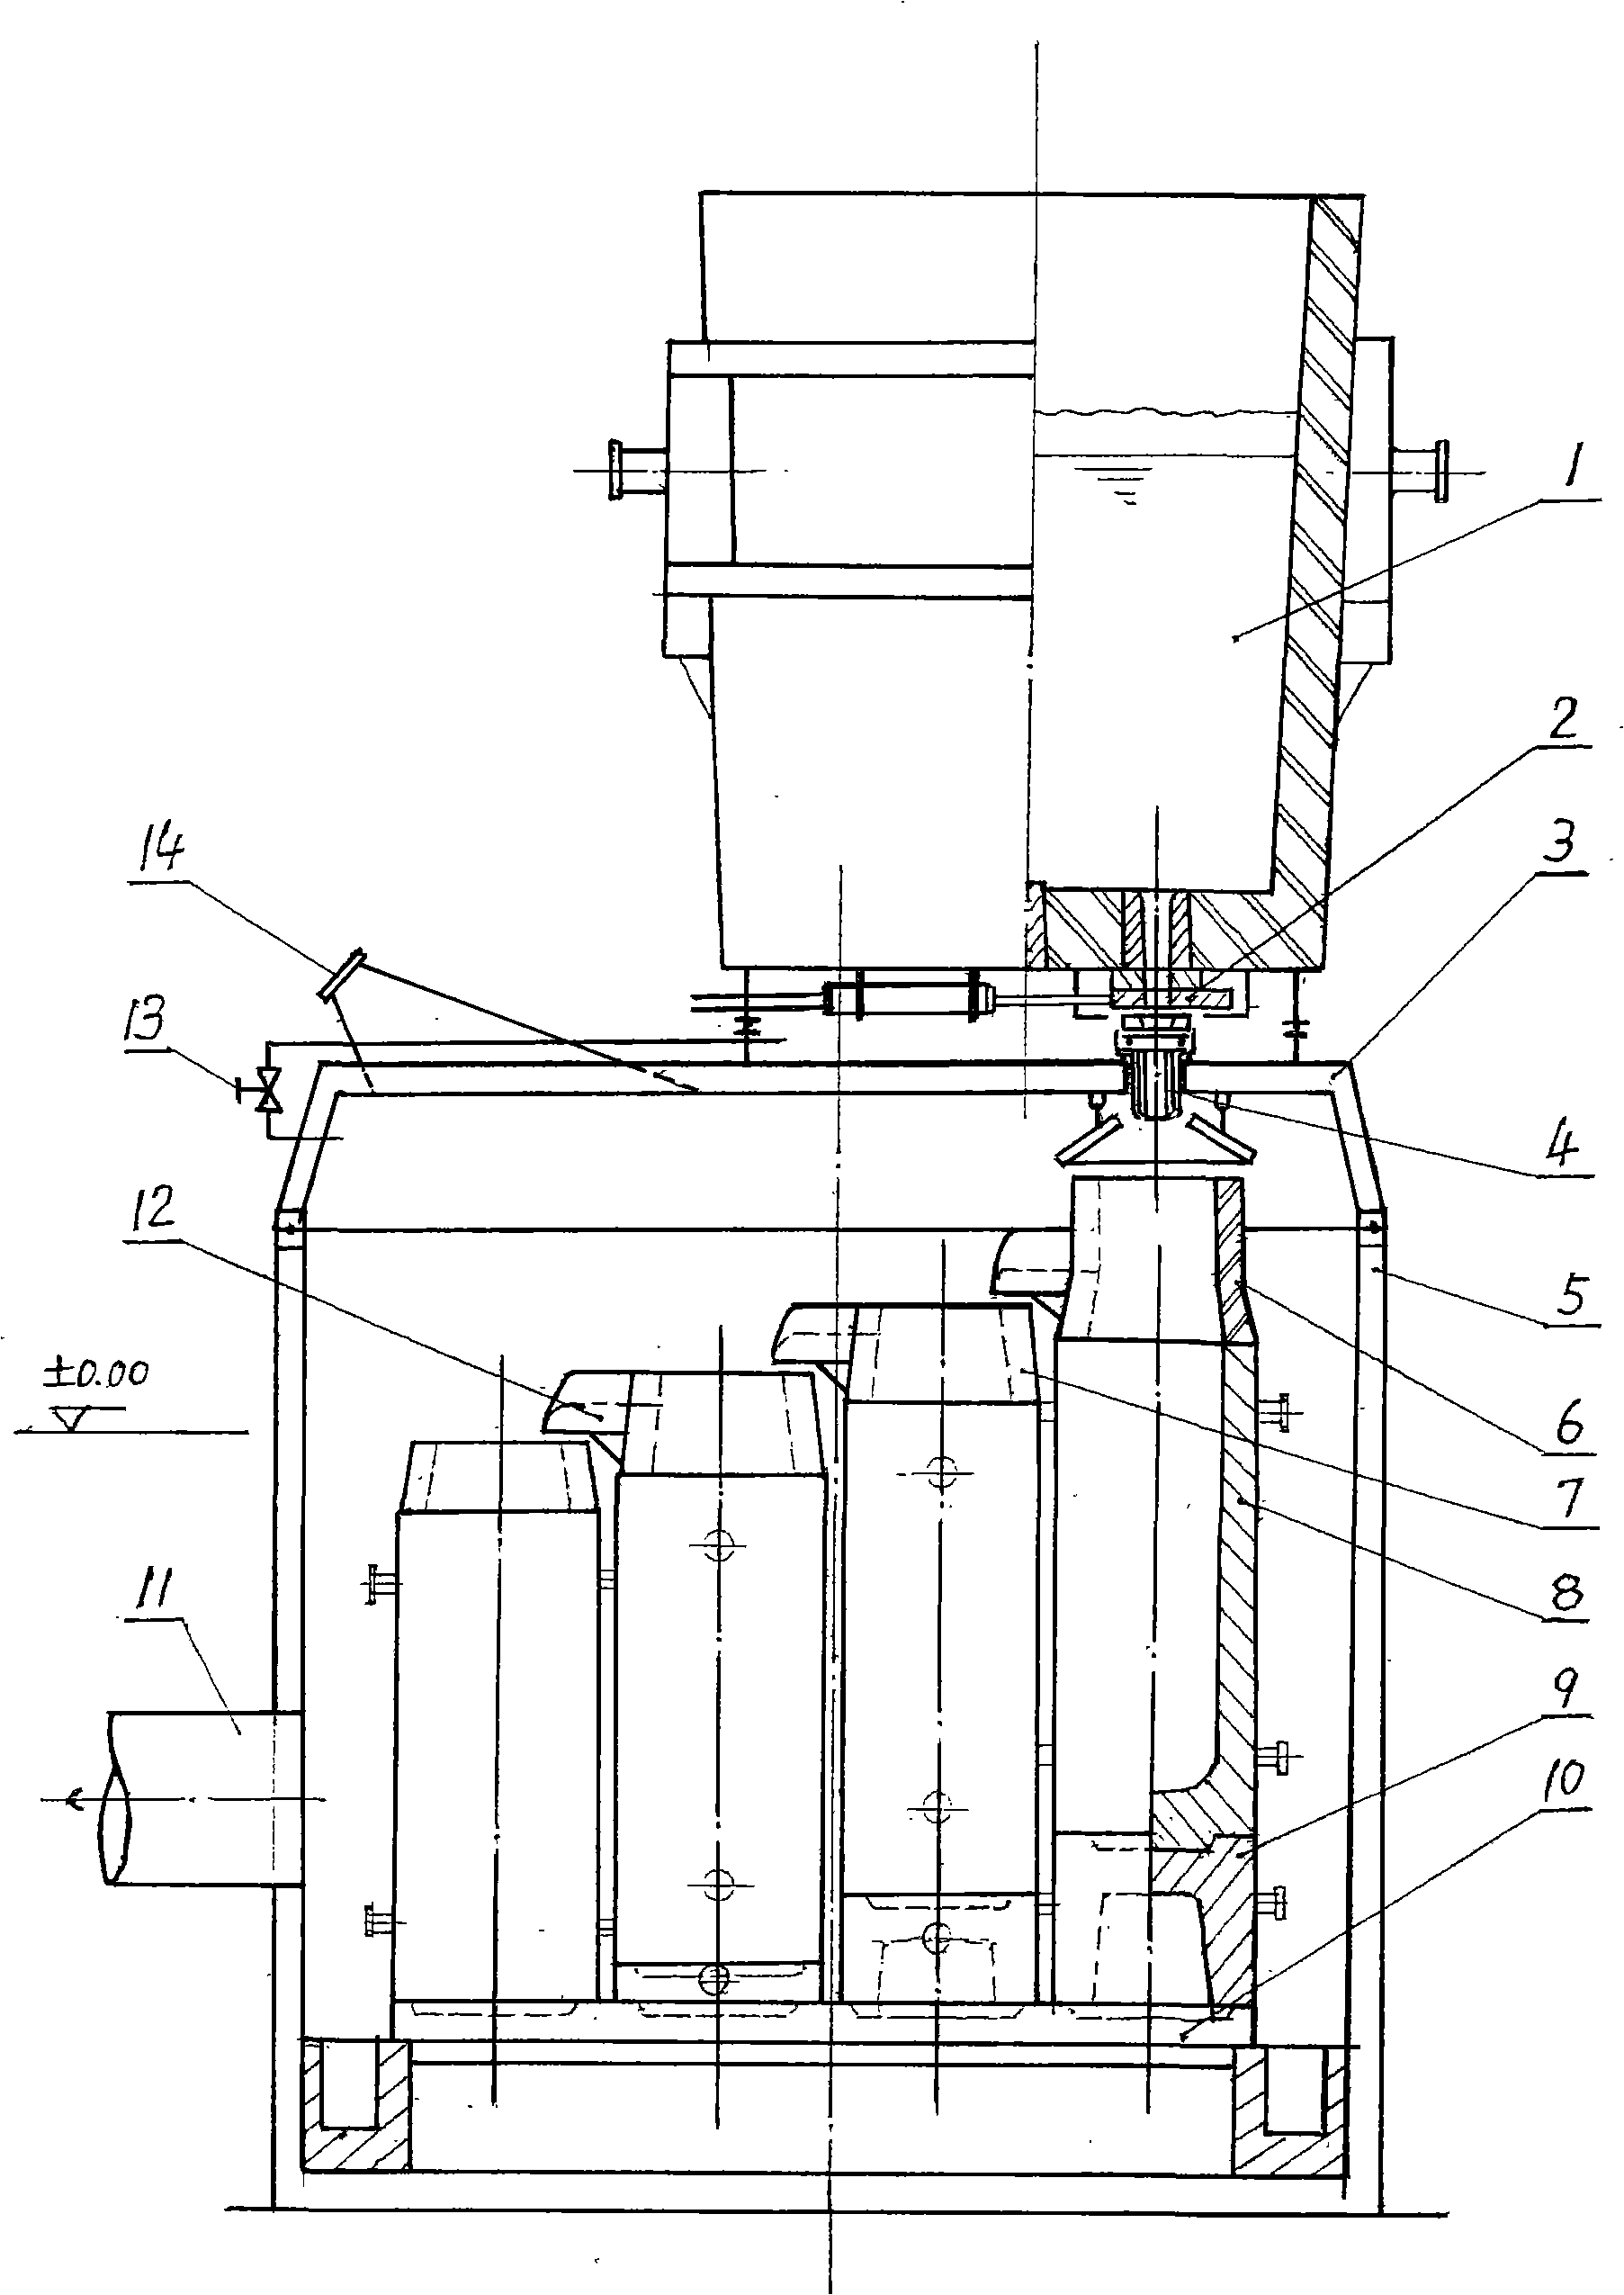 Equipment and process for casting multi-branch steel ingot with vacuum spill method and liquid steel